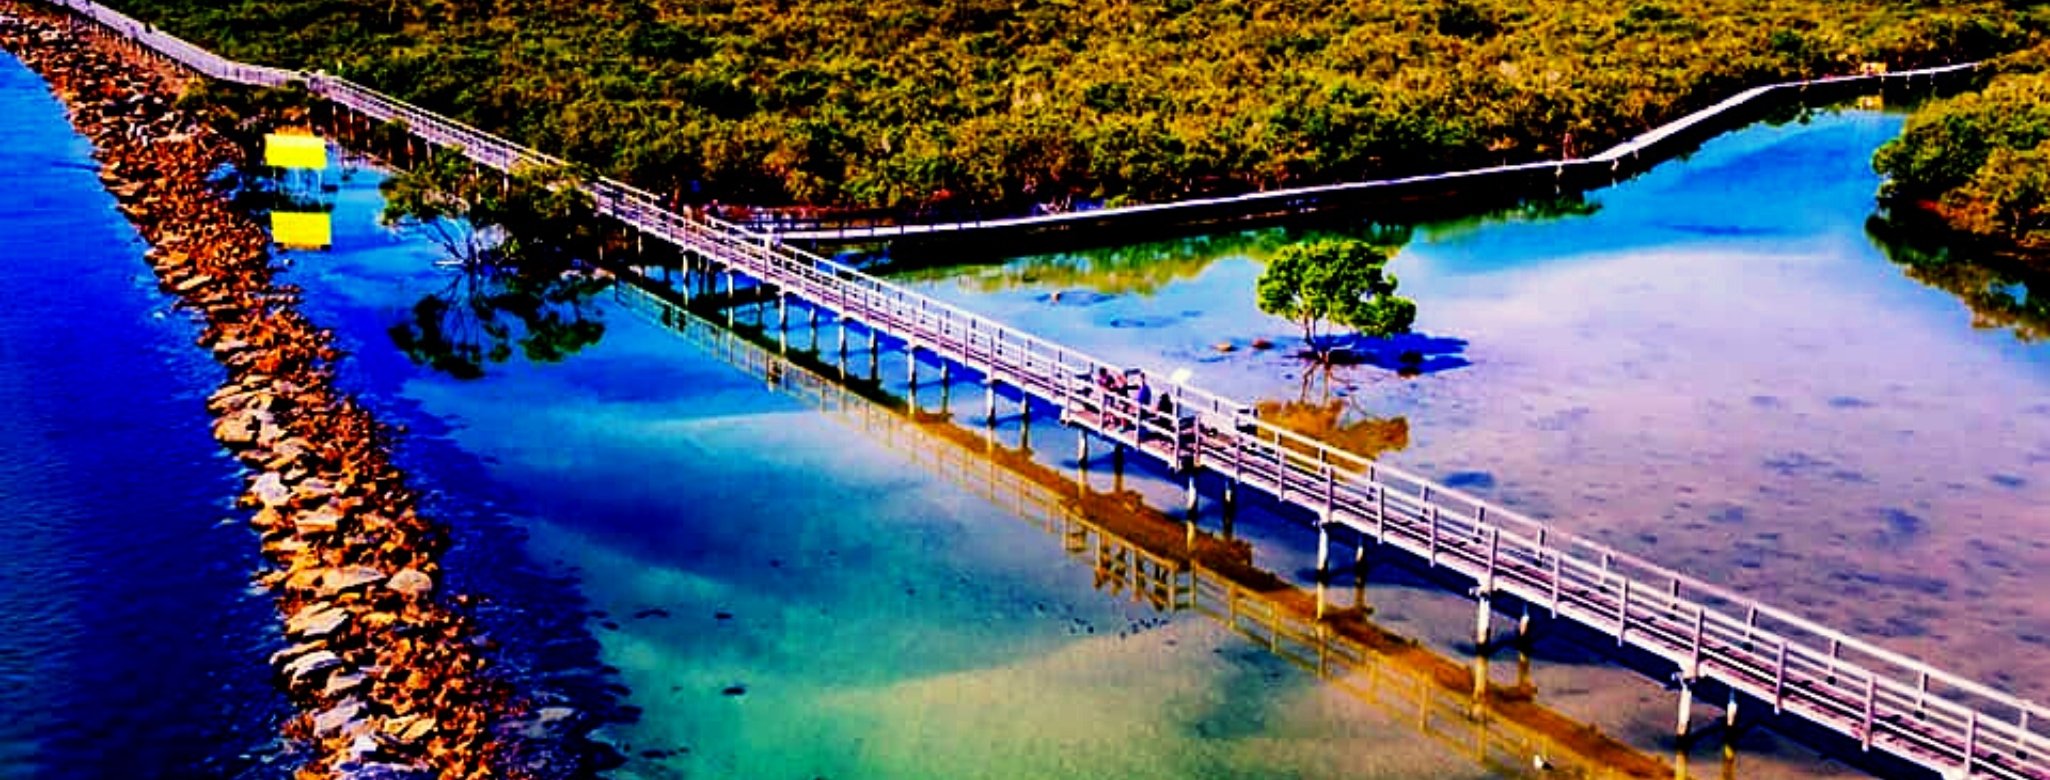 Urungas Accessible and Wheelchair Friendly Boardwalk short walk from Riverside Holiday Resort 